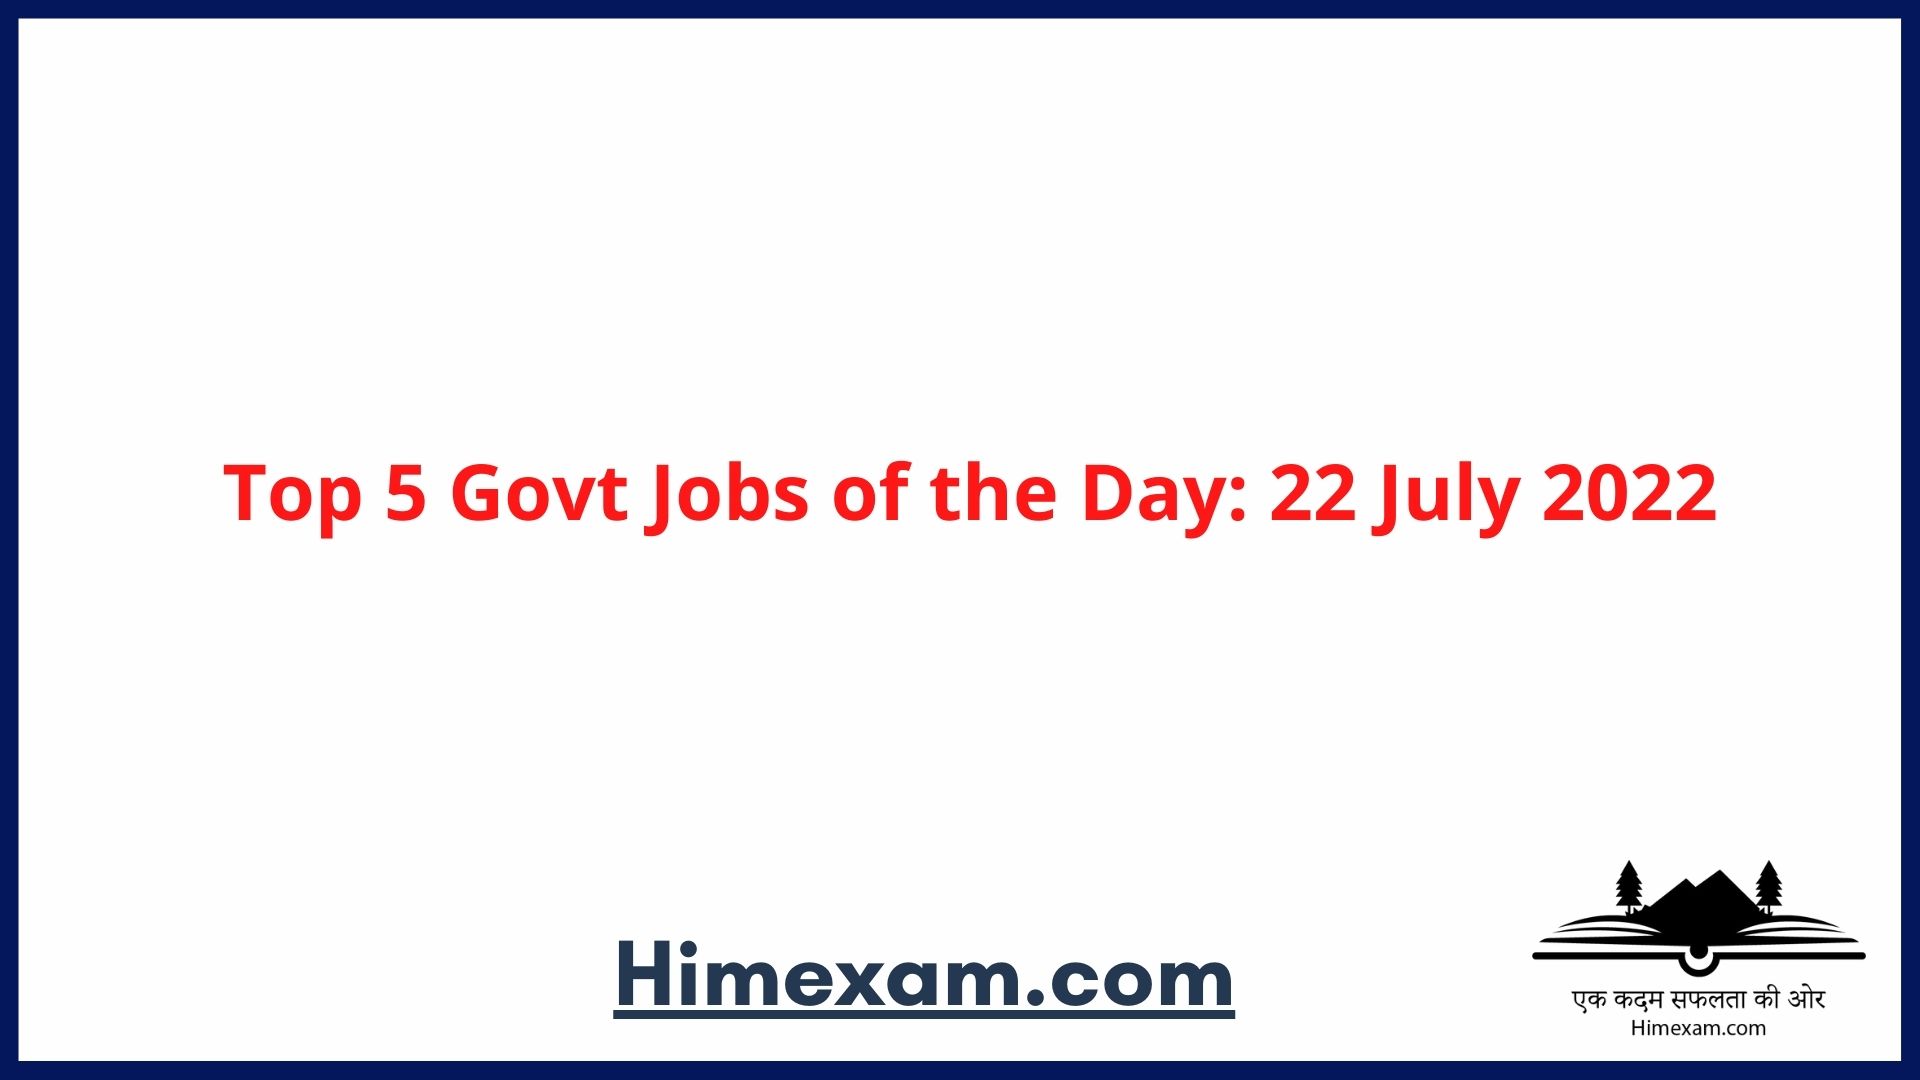 Top 5 Govt Jobs of the Day: 22 July 2022